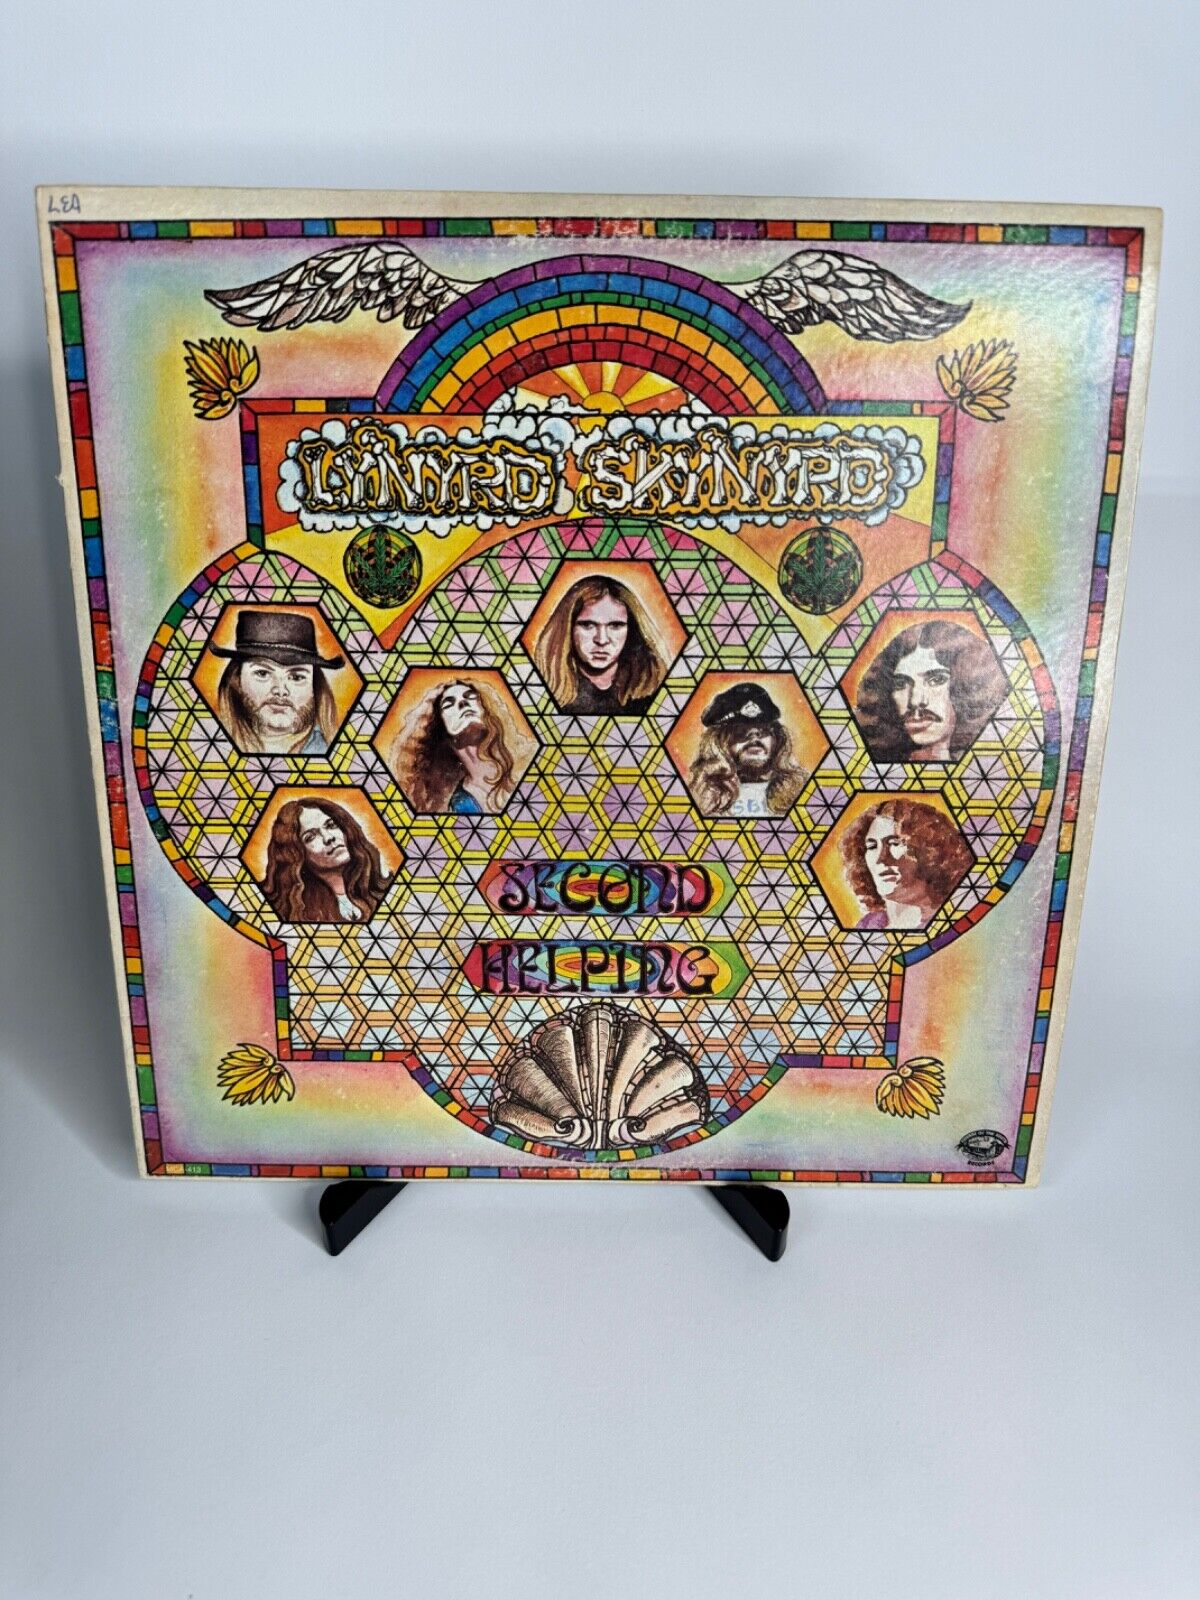 Lynyrd Skynyrd Second Helping 1974 LP MCA-413 "Sounds of the South" Yellow Label